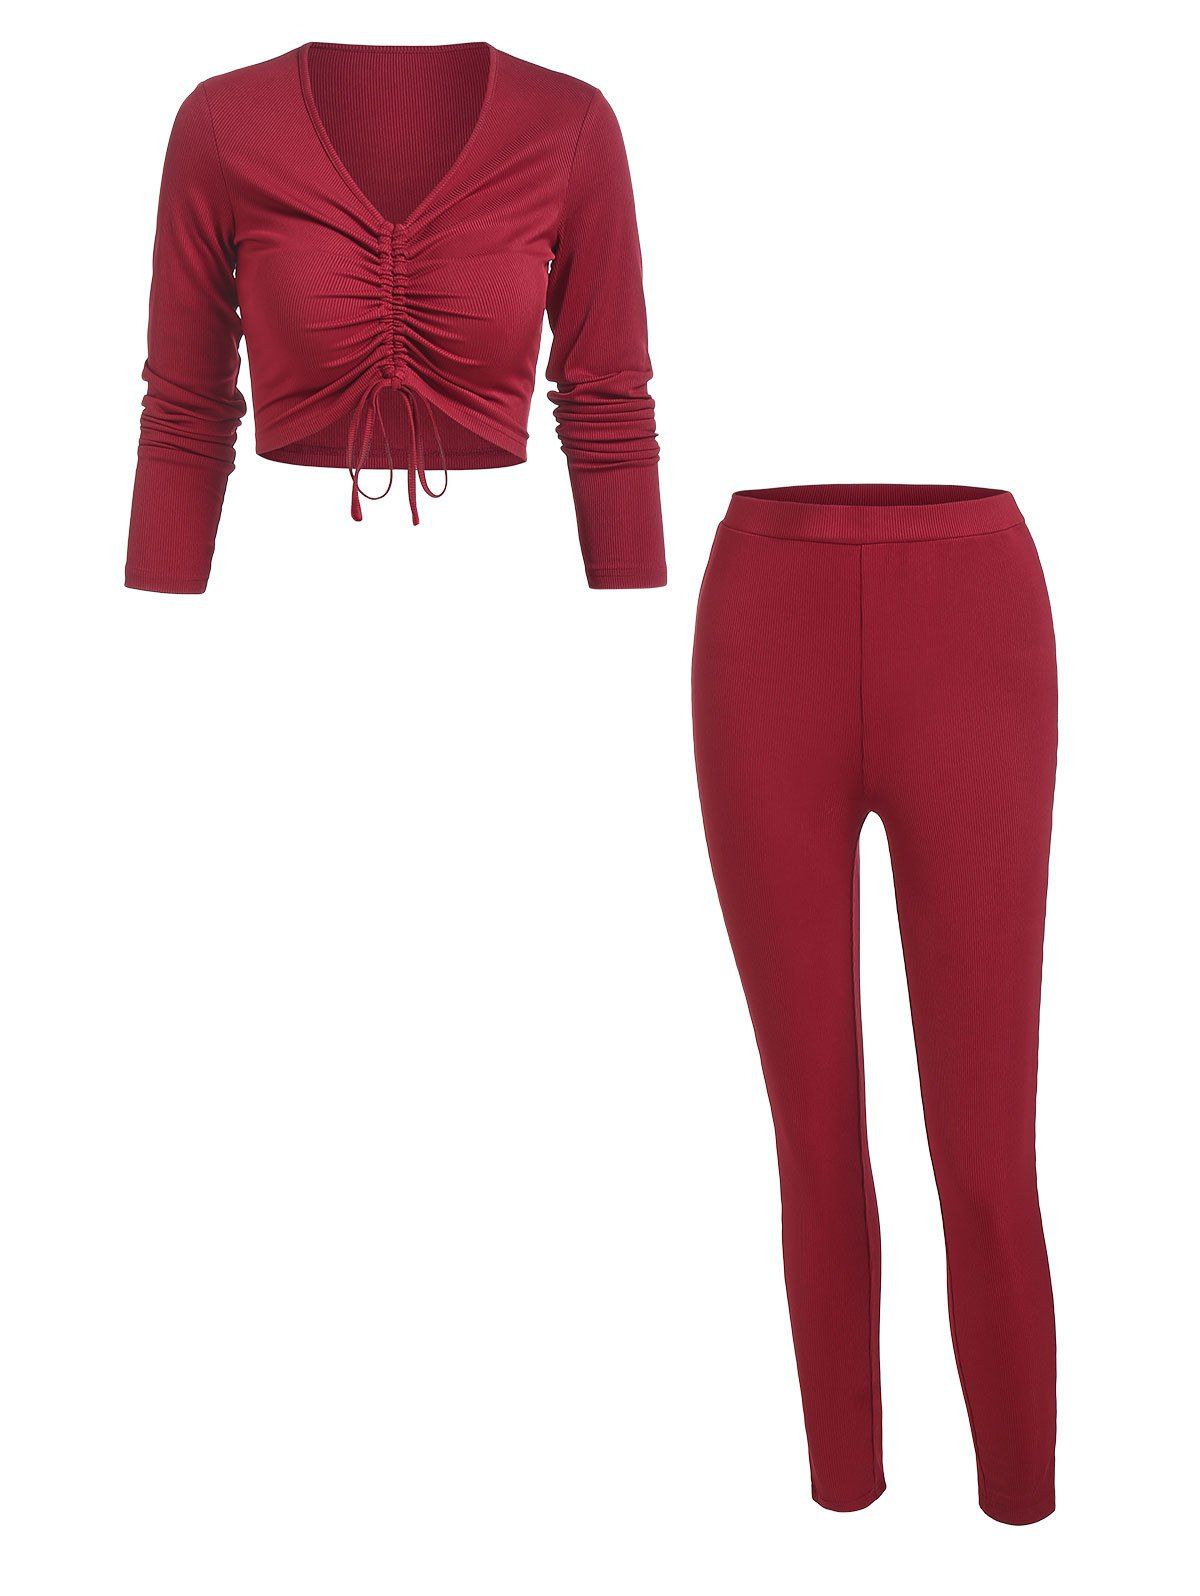 Cinched Crop Top and High Rise Skinny Leggings Set - DEEP RED L